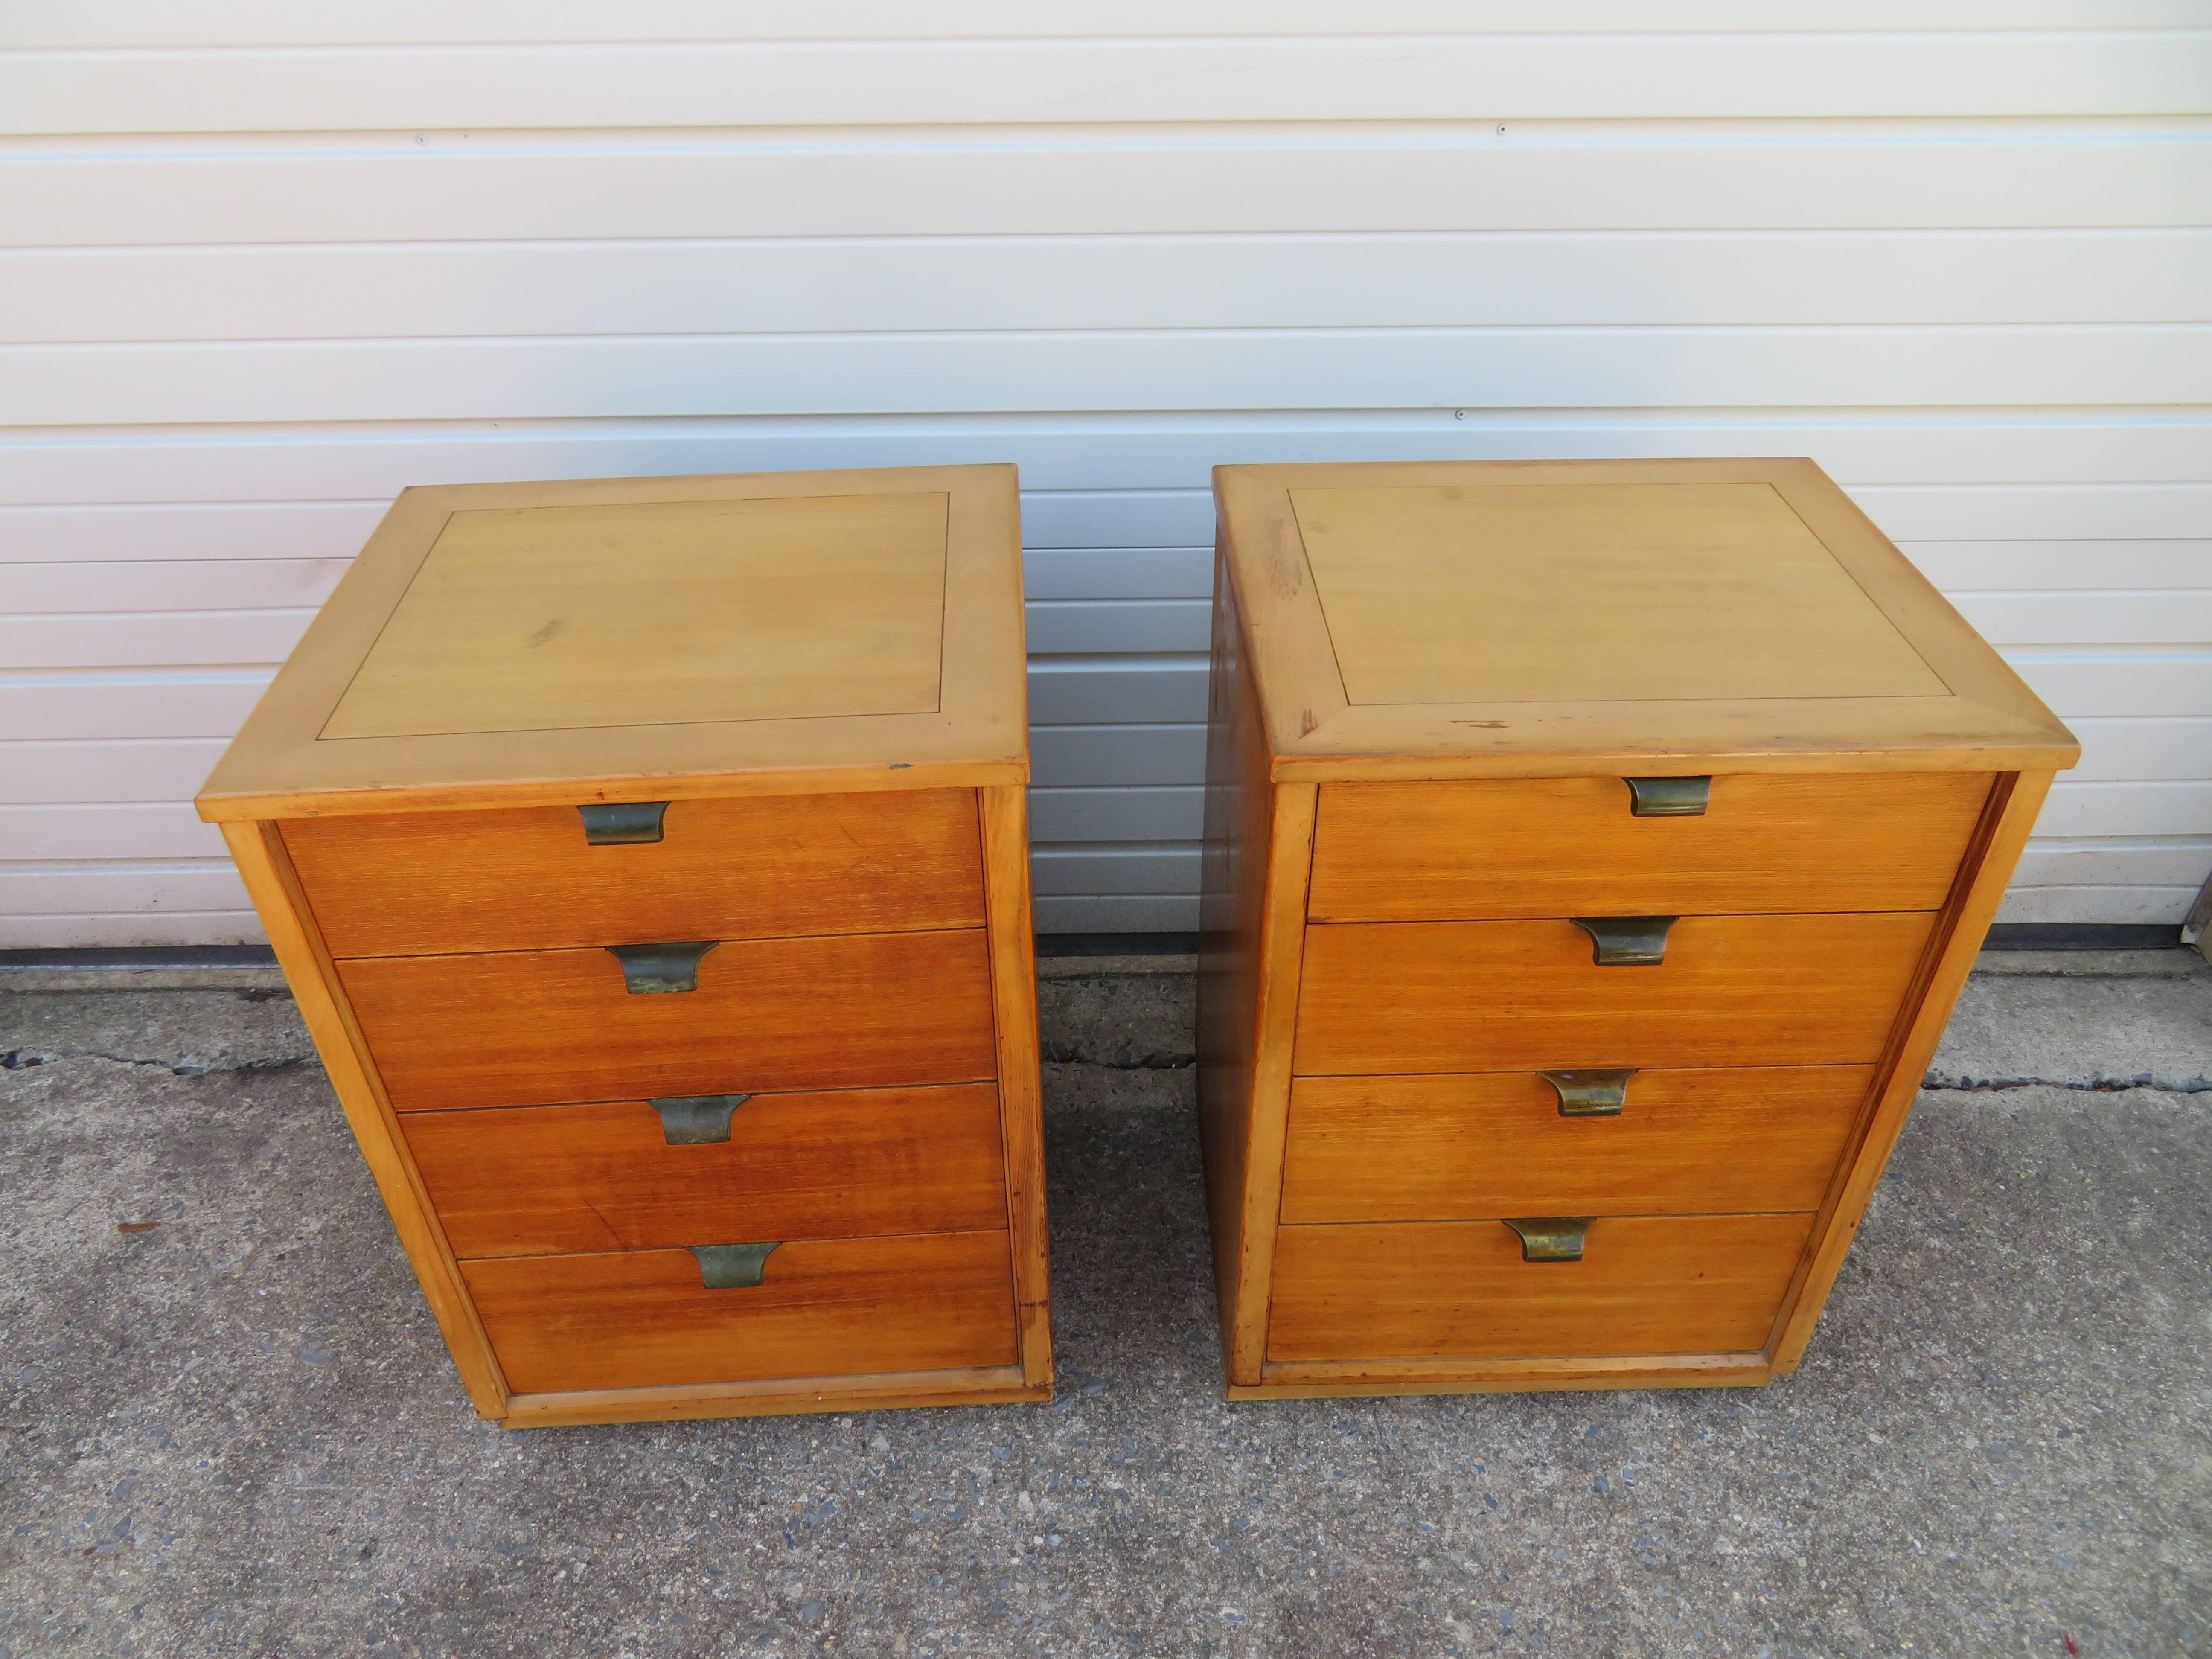 Lovely pair of Edward Wormley for Drexel precedent end tables or nightstands. These pieces are in vintage condition and do show wear to the finish-we recommend refinishing or lacquering. We imagine them in a fun color like turquoise or orange-how